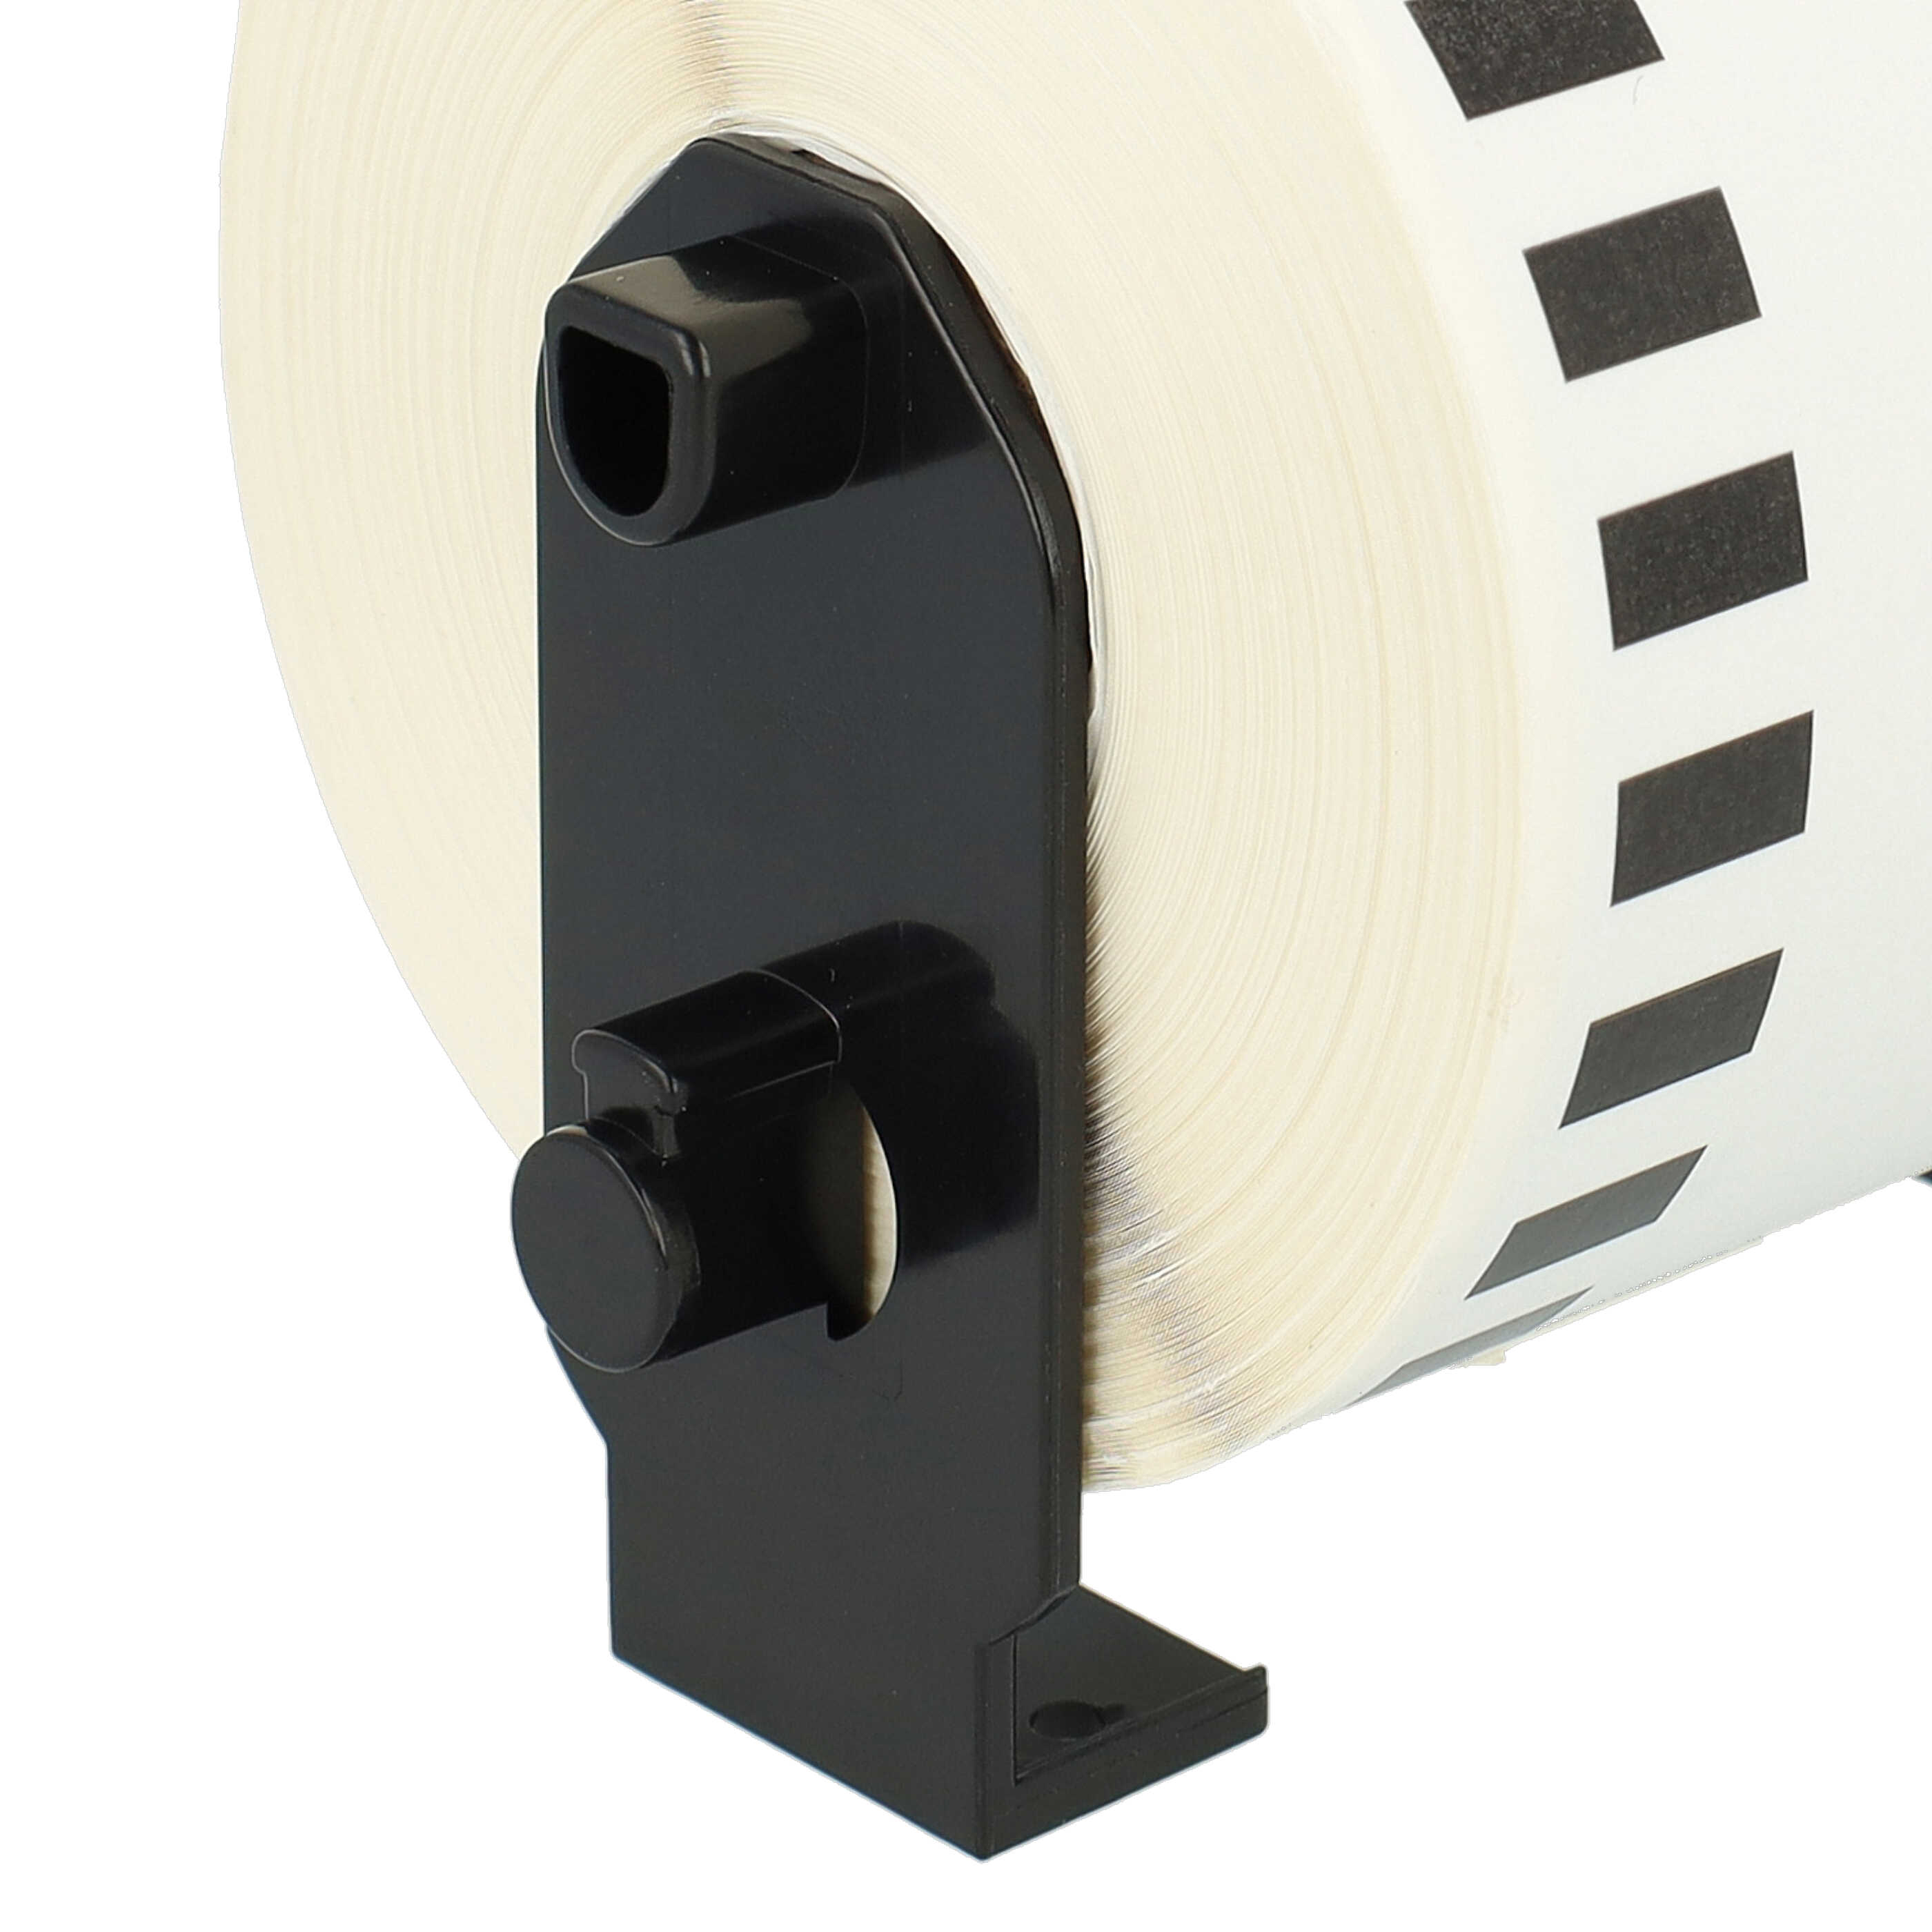 3x Labels replaces Brother DK-22205 for Labeller - 62 mm x 30.48m + Holder